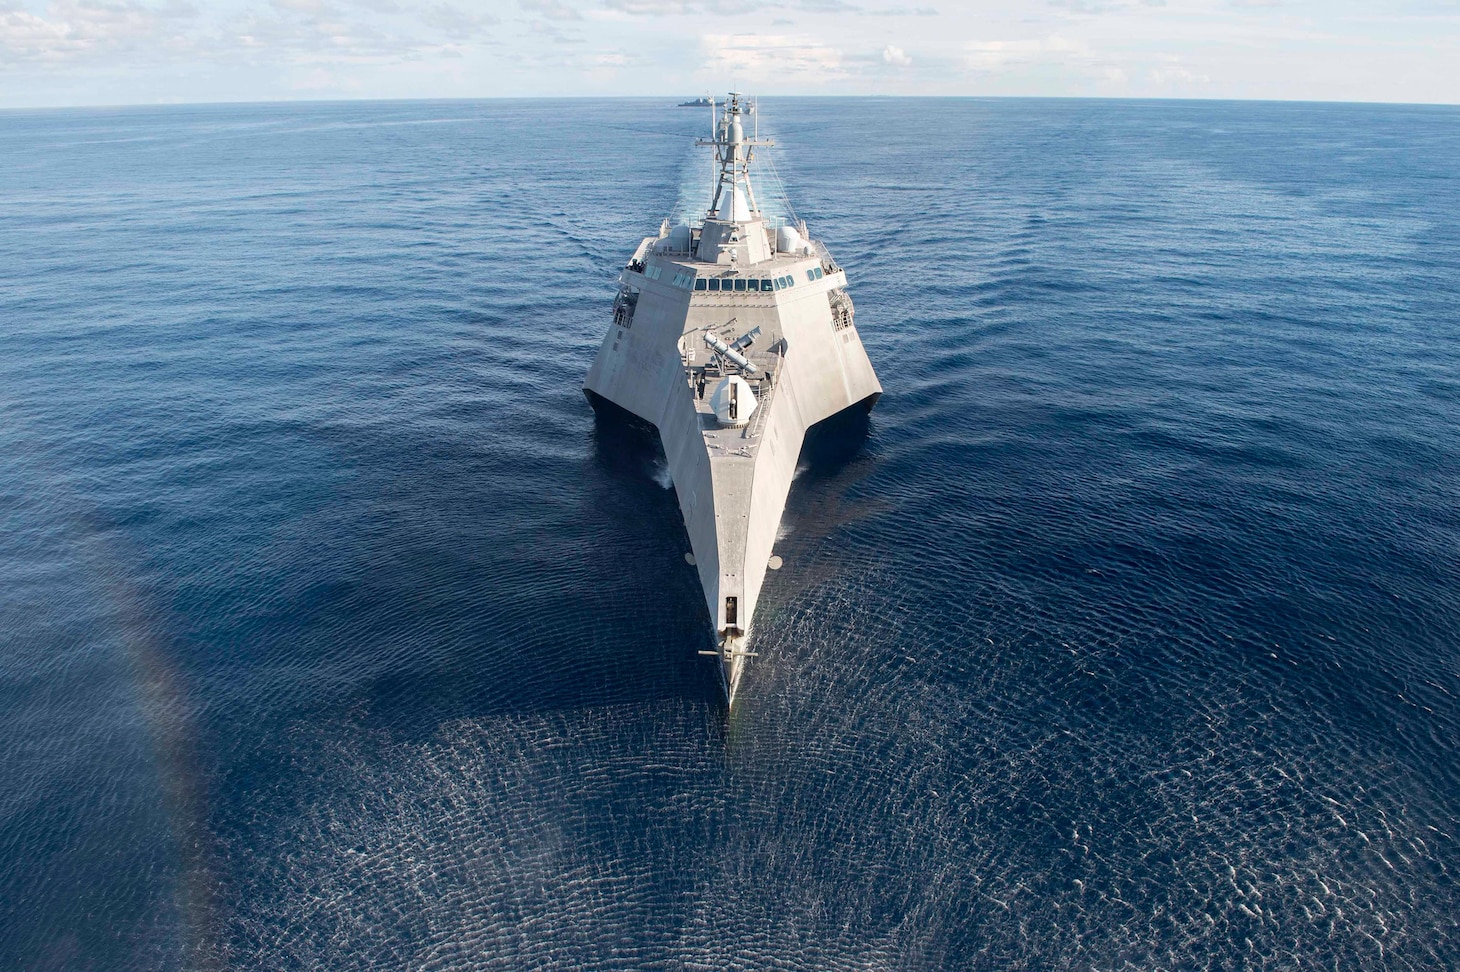 Littoral combat ship USS Coronado (LCS 4) sails during a photo exercise as part of multilateral Cooperation Afloat Readiness and Training (CARAT) exercise with the Republic of Singapore and Royal Thai navies, May 11, 2017. CARAT is a series of annual maritime exercises aimed at strengthening partnerships and increasing interoperability through bilateral and multilateral engagements ashore and at sea. 